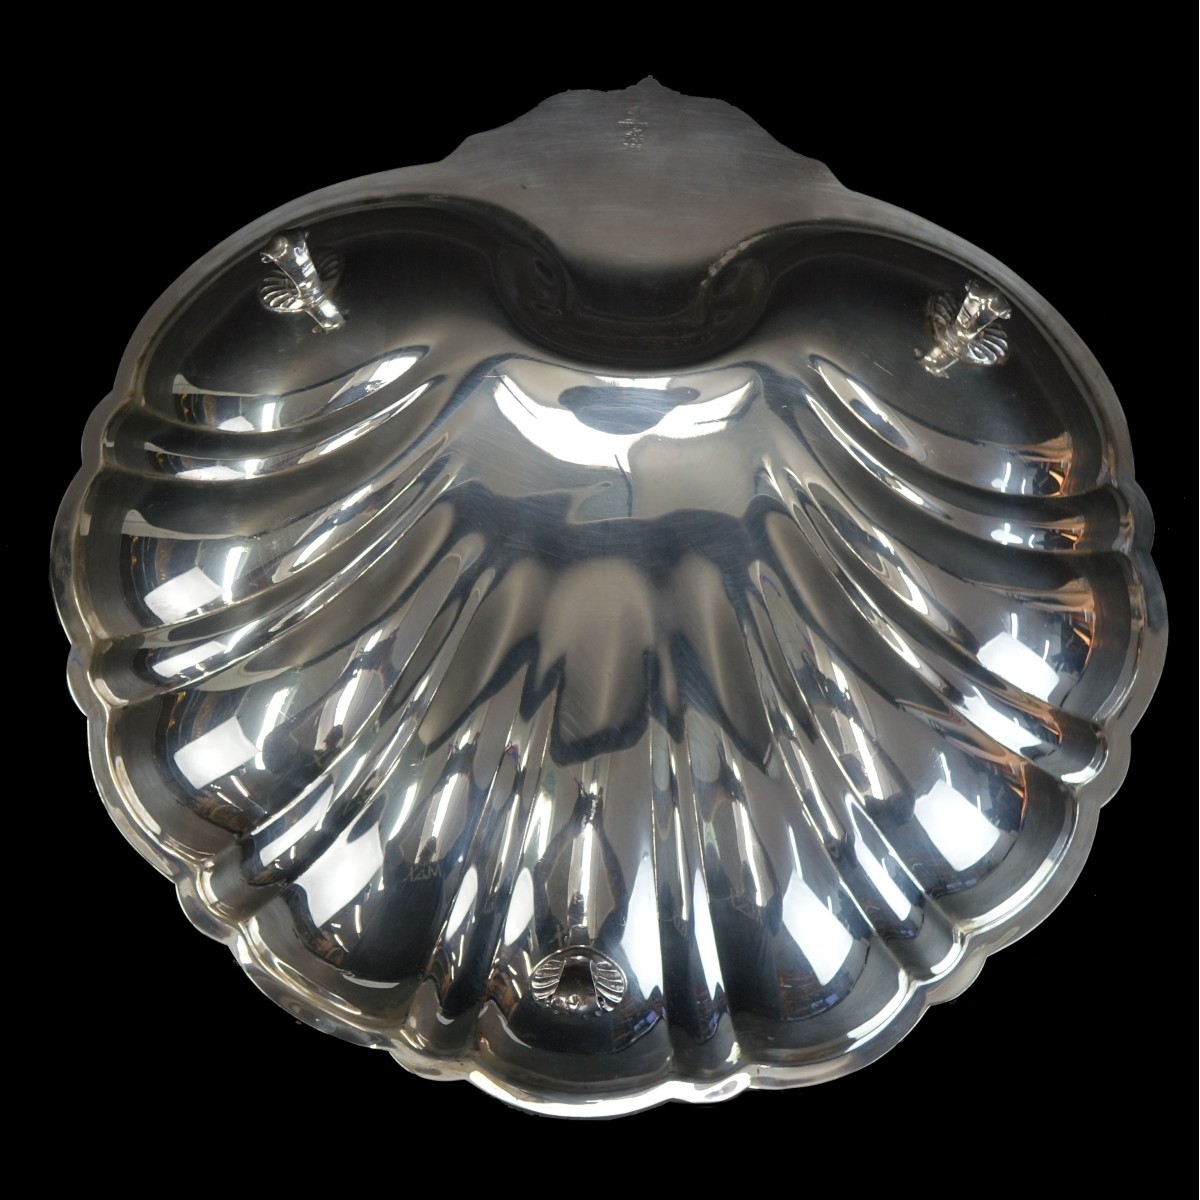 Poole Sterling Shell Dish